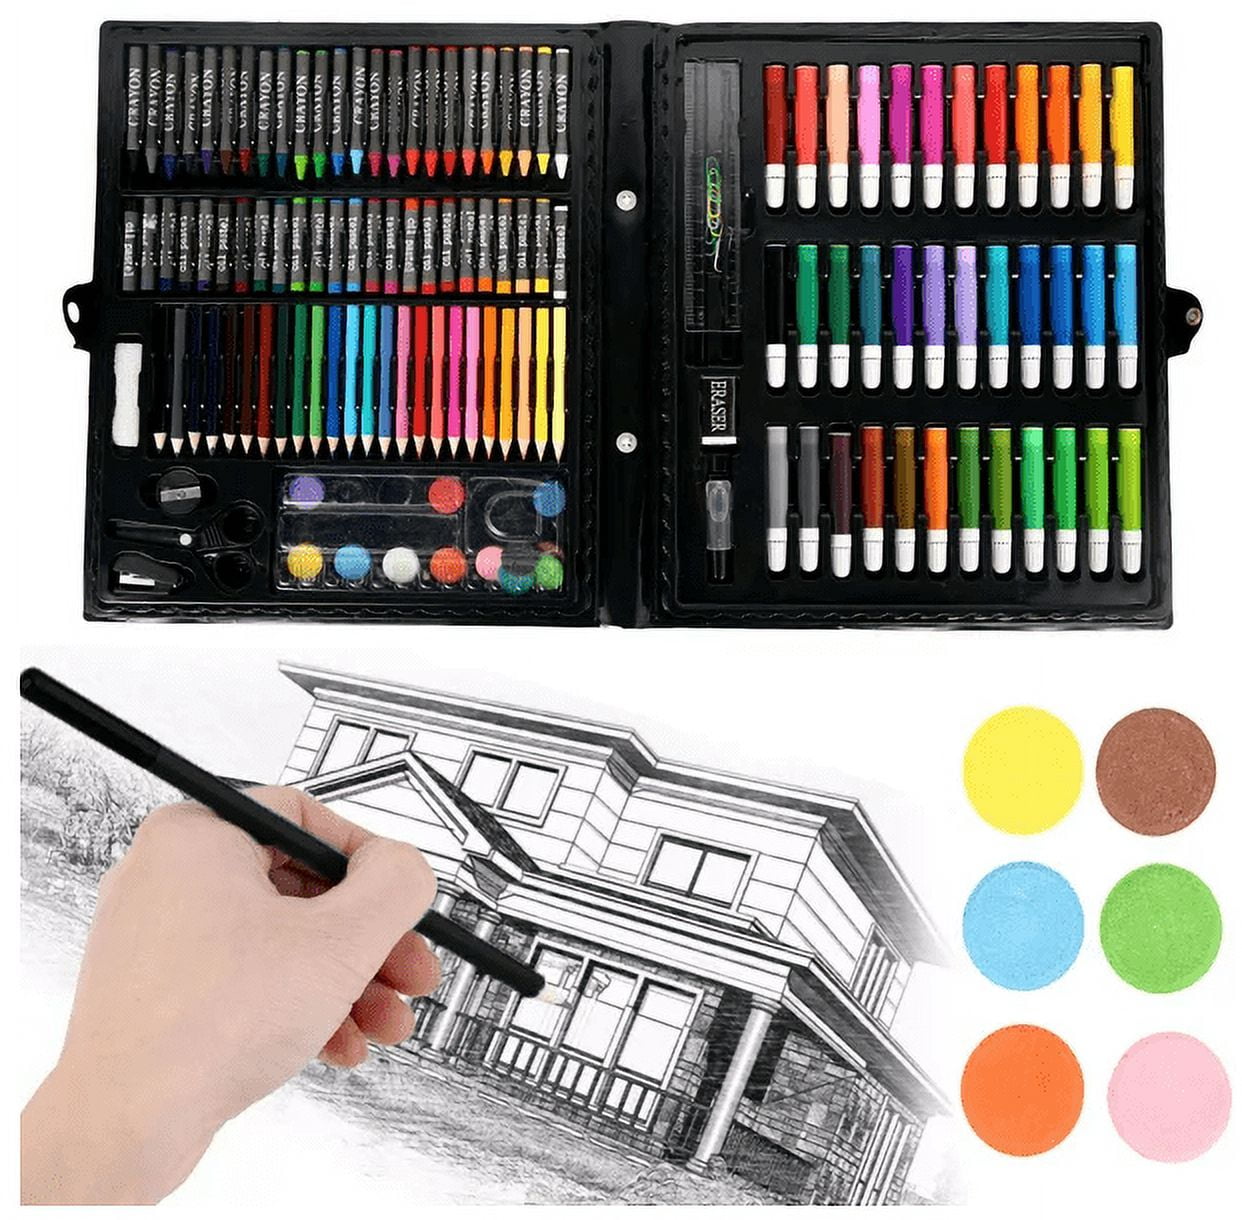 Cokiki Art Supplies, 184-Piece Drawing Art Set, Gift Art Kit Case with  Colored Pencils,Crayons,Oil Pastels,Watercolor Paint Set,Creative Gift for  Kids 6-12,Teens,Adults Artist Beginners - Coupon Codes, Promo Codes, Daily  Deals, Save Money